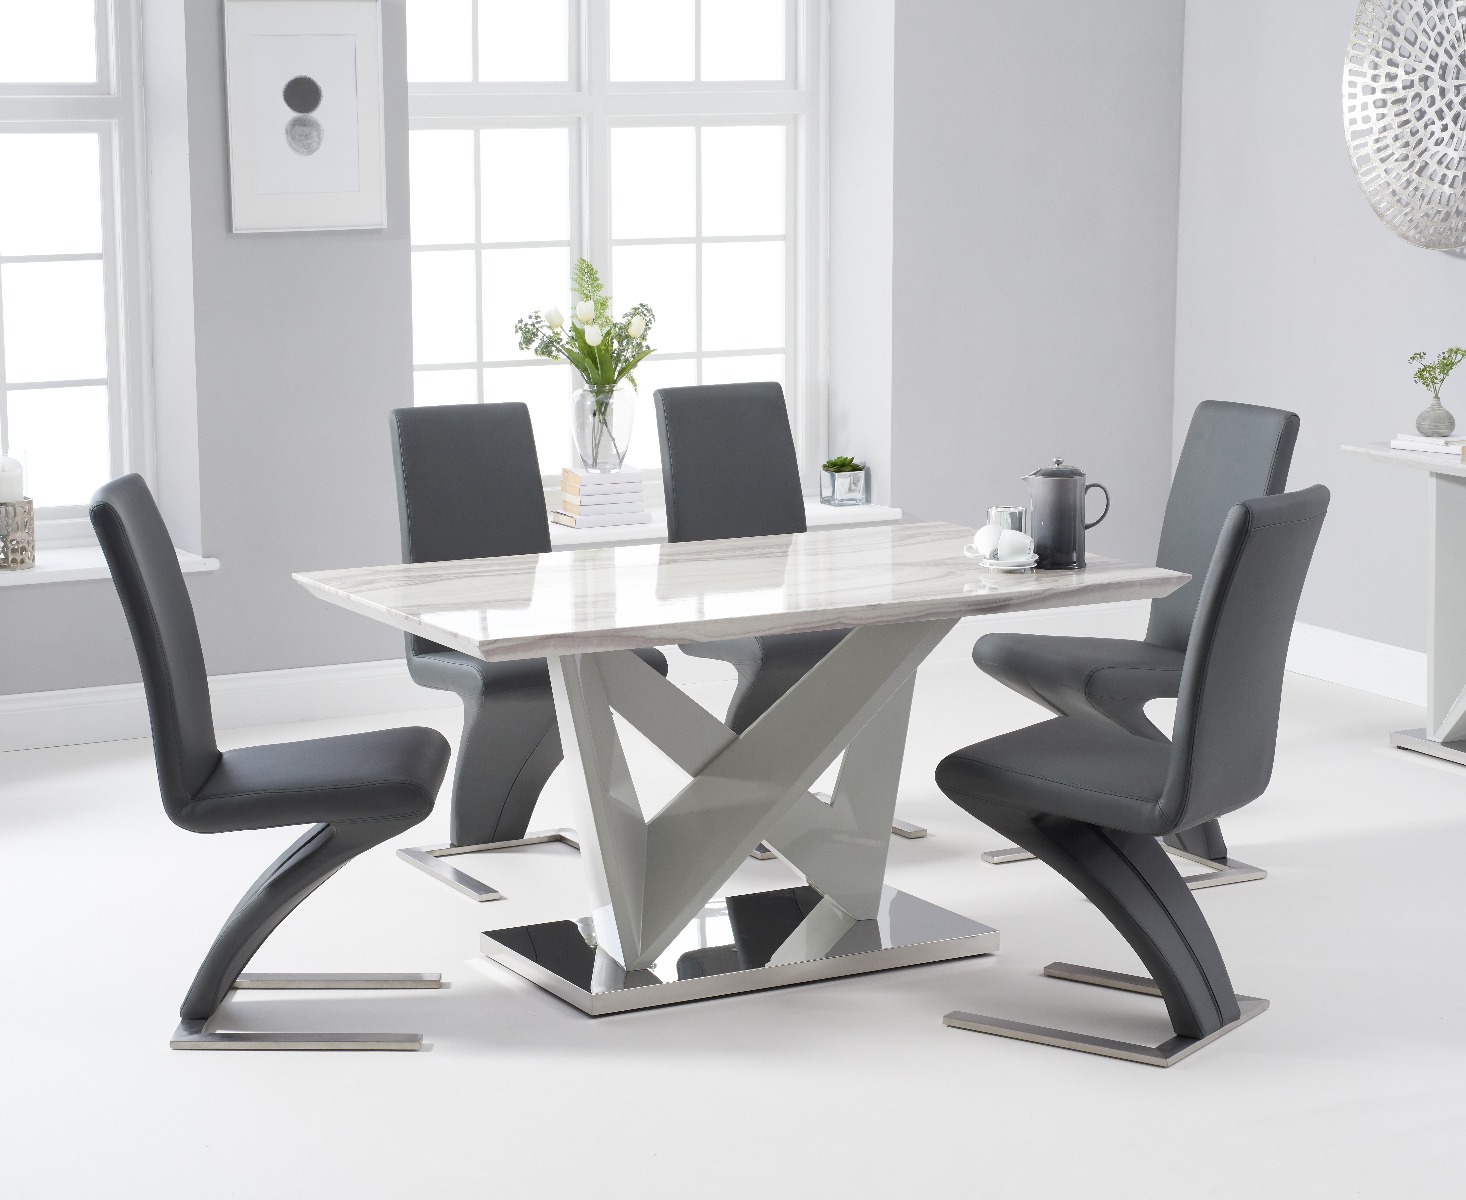 Reims 150cm Marble Effect Carrera Light Grey Dining Table With 6 Grey Aldo Chairs